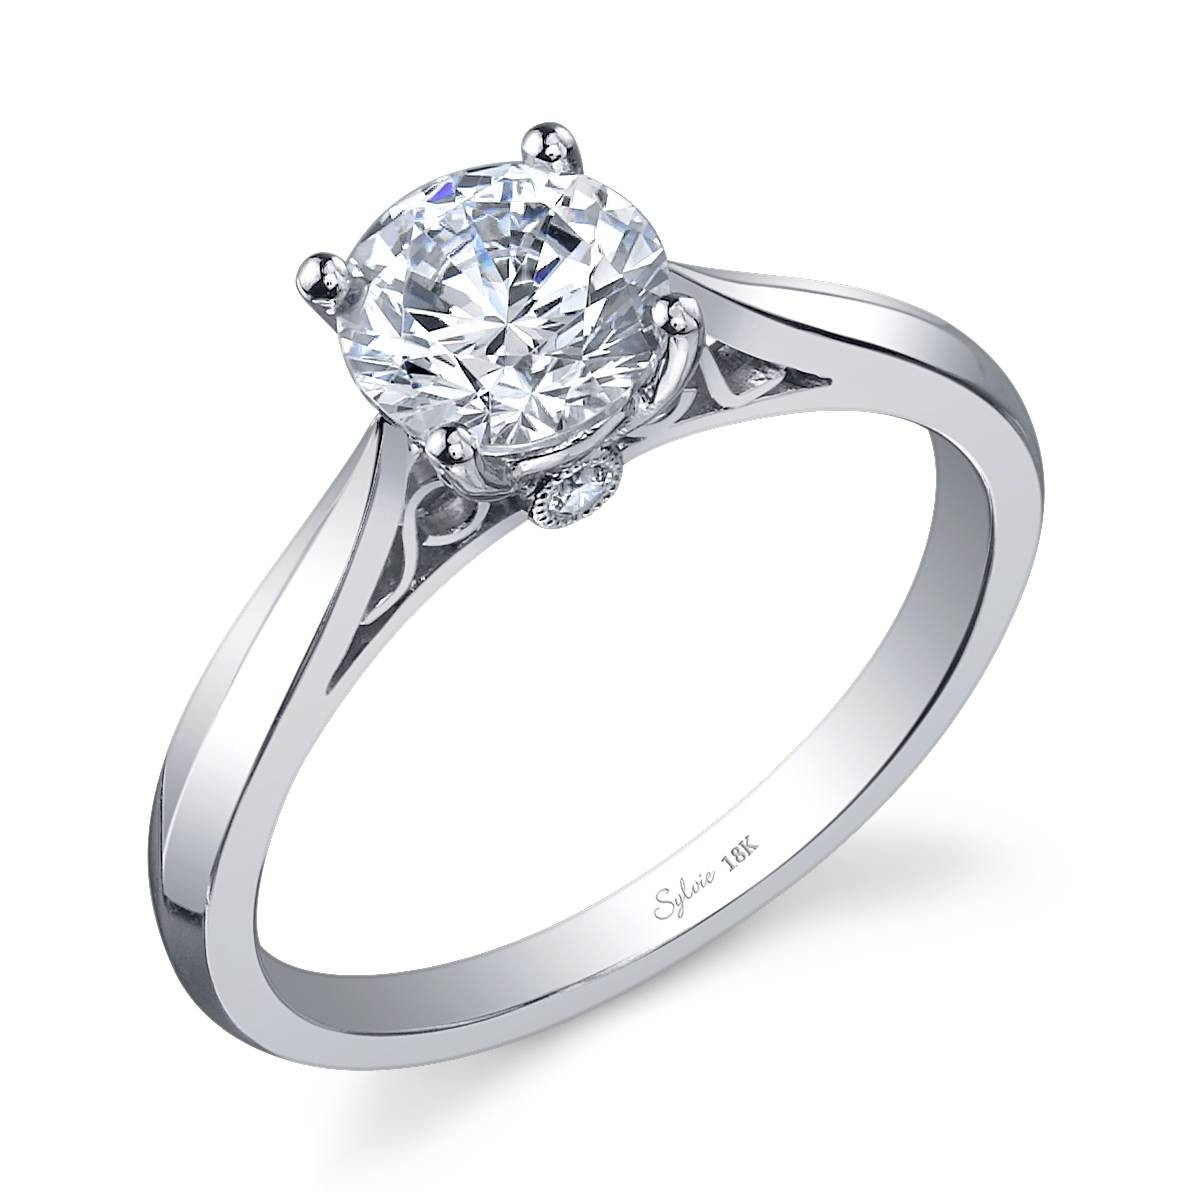 Wedding Ring Settings Without Stones
 2019 Popular Wedding Rings Settings Without Center Stone